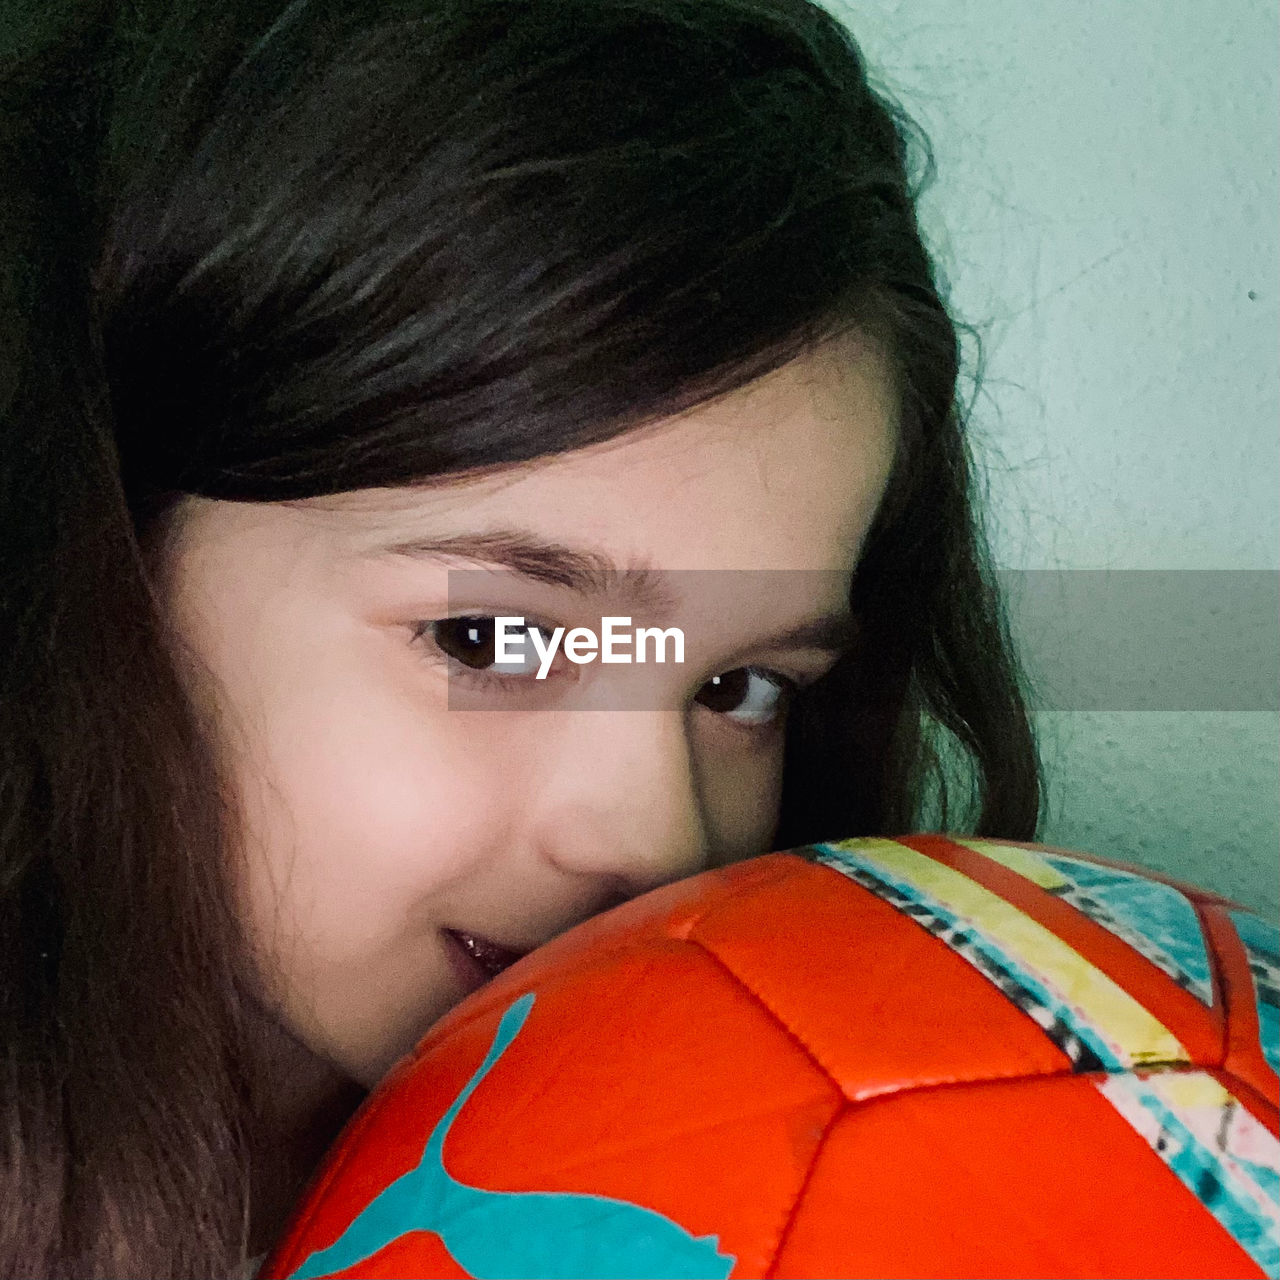 portrait, one person, sports, soccer, team sport, child, football, soccer ball, ball, sports equipment, looking at camera, headshot, childhood, teenager, human face, women, person, human head, hairstyle, red, lifestyles, female, emotion, adult, athlete, indoors, leisure activity, close-up, nose, brown hair, sports uniform, clothing